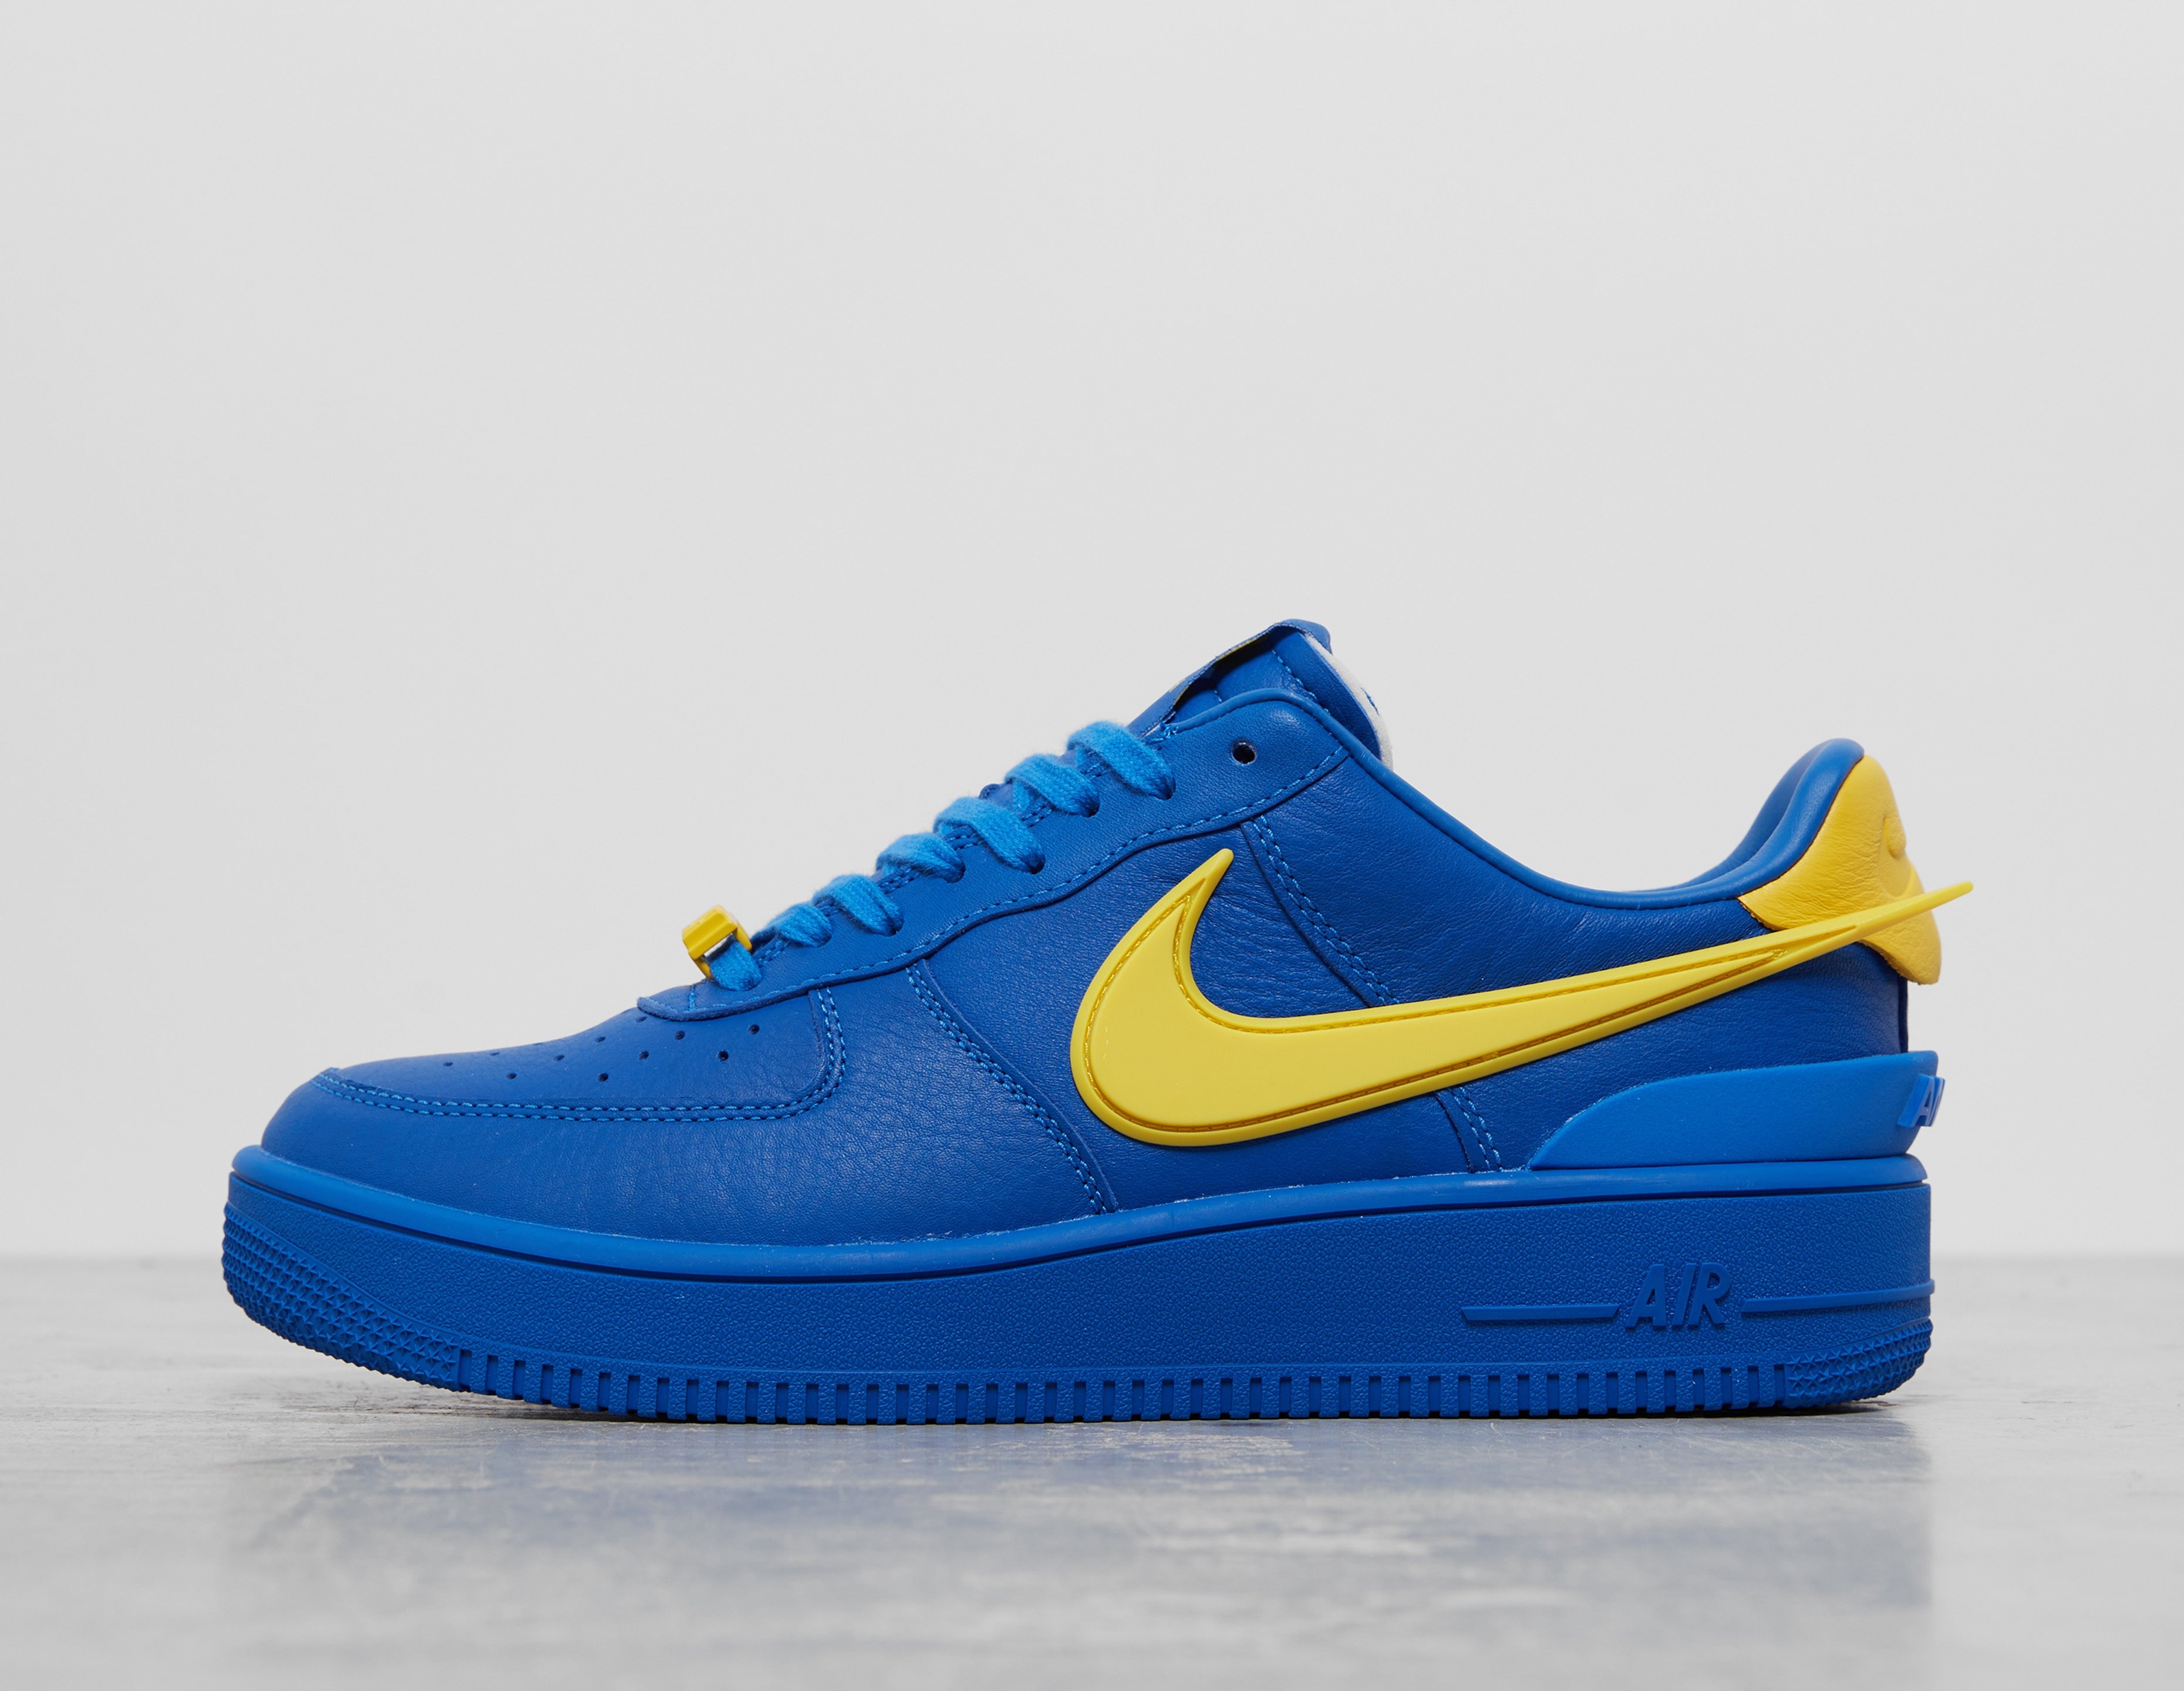 Off-White™ x Nike Air Force 1 Low University Gold